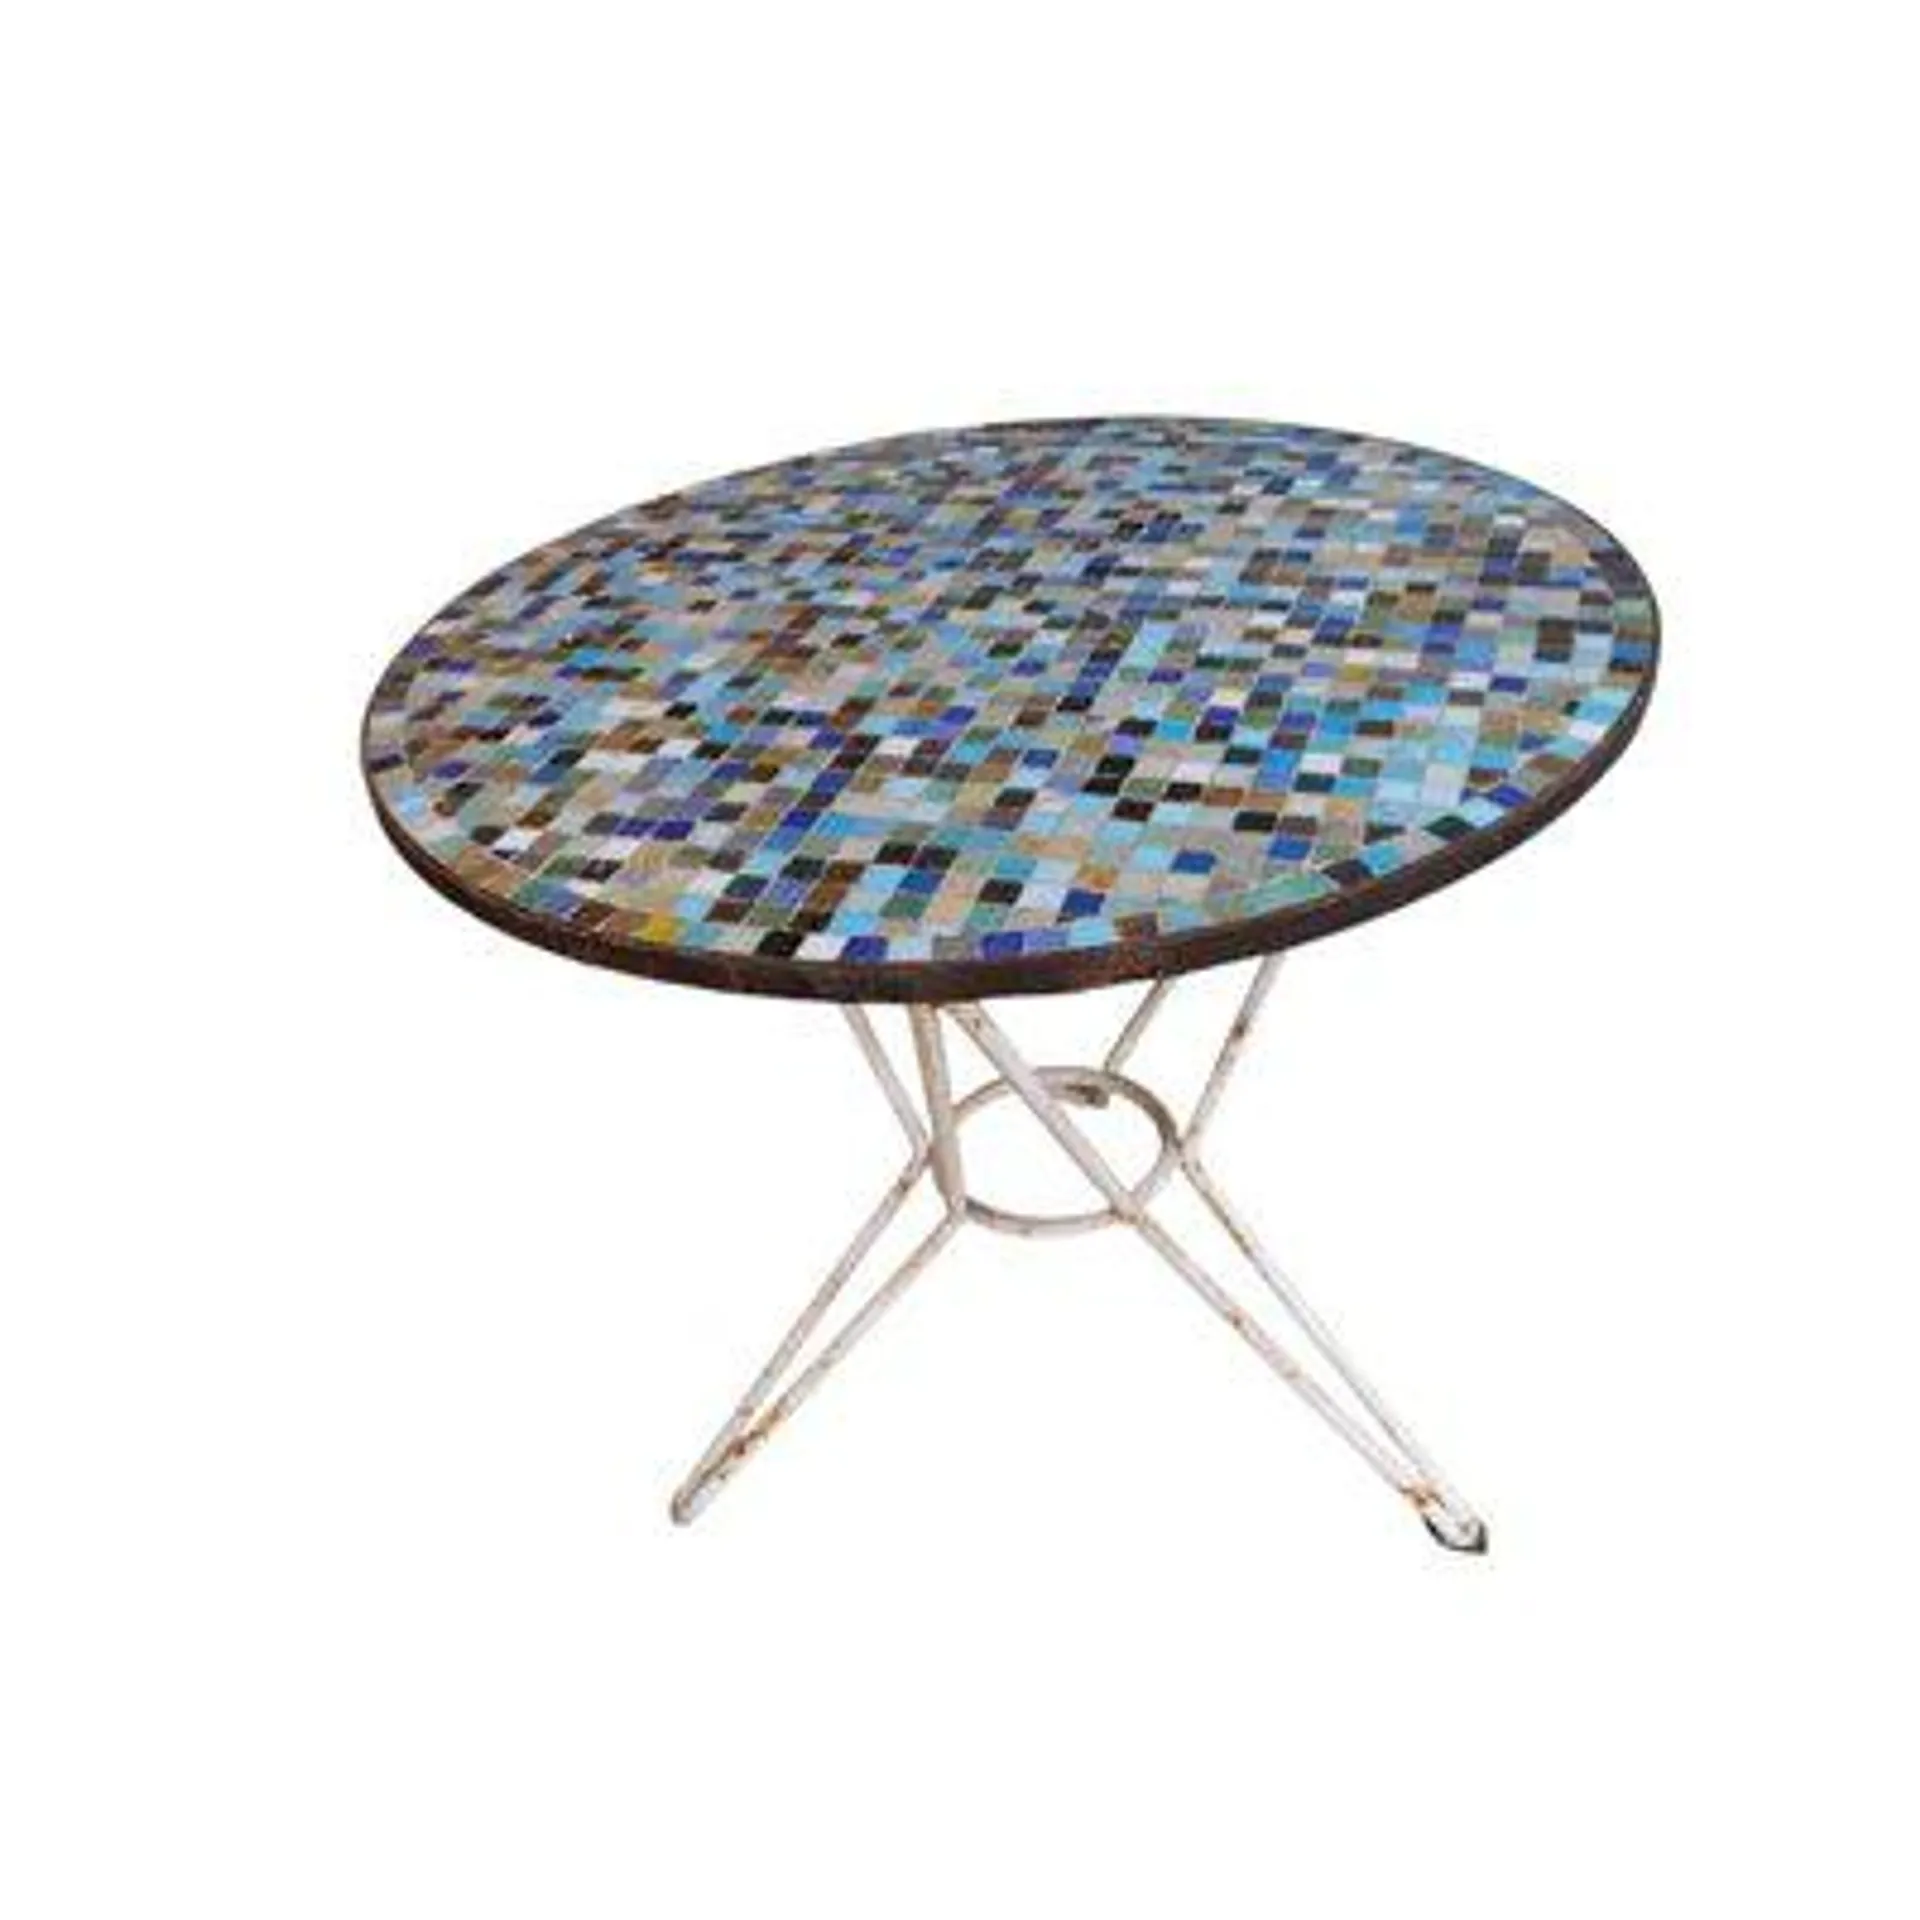 Mid-Century Spanish Outdoor Round Table with Tiles